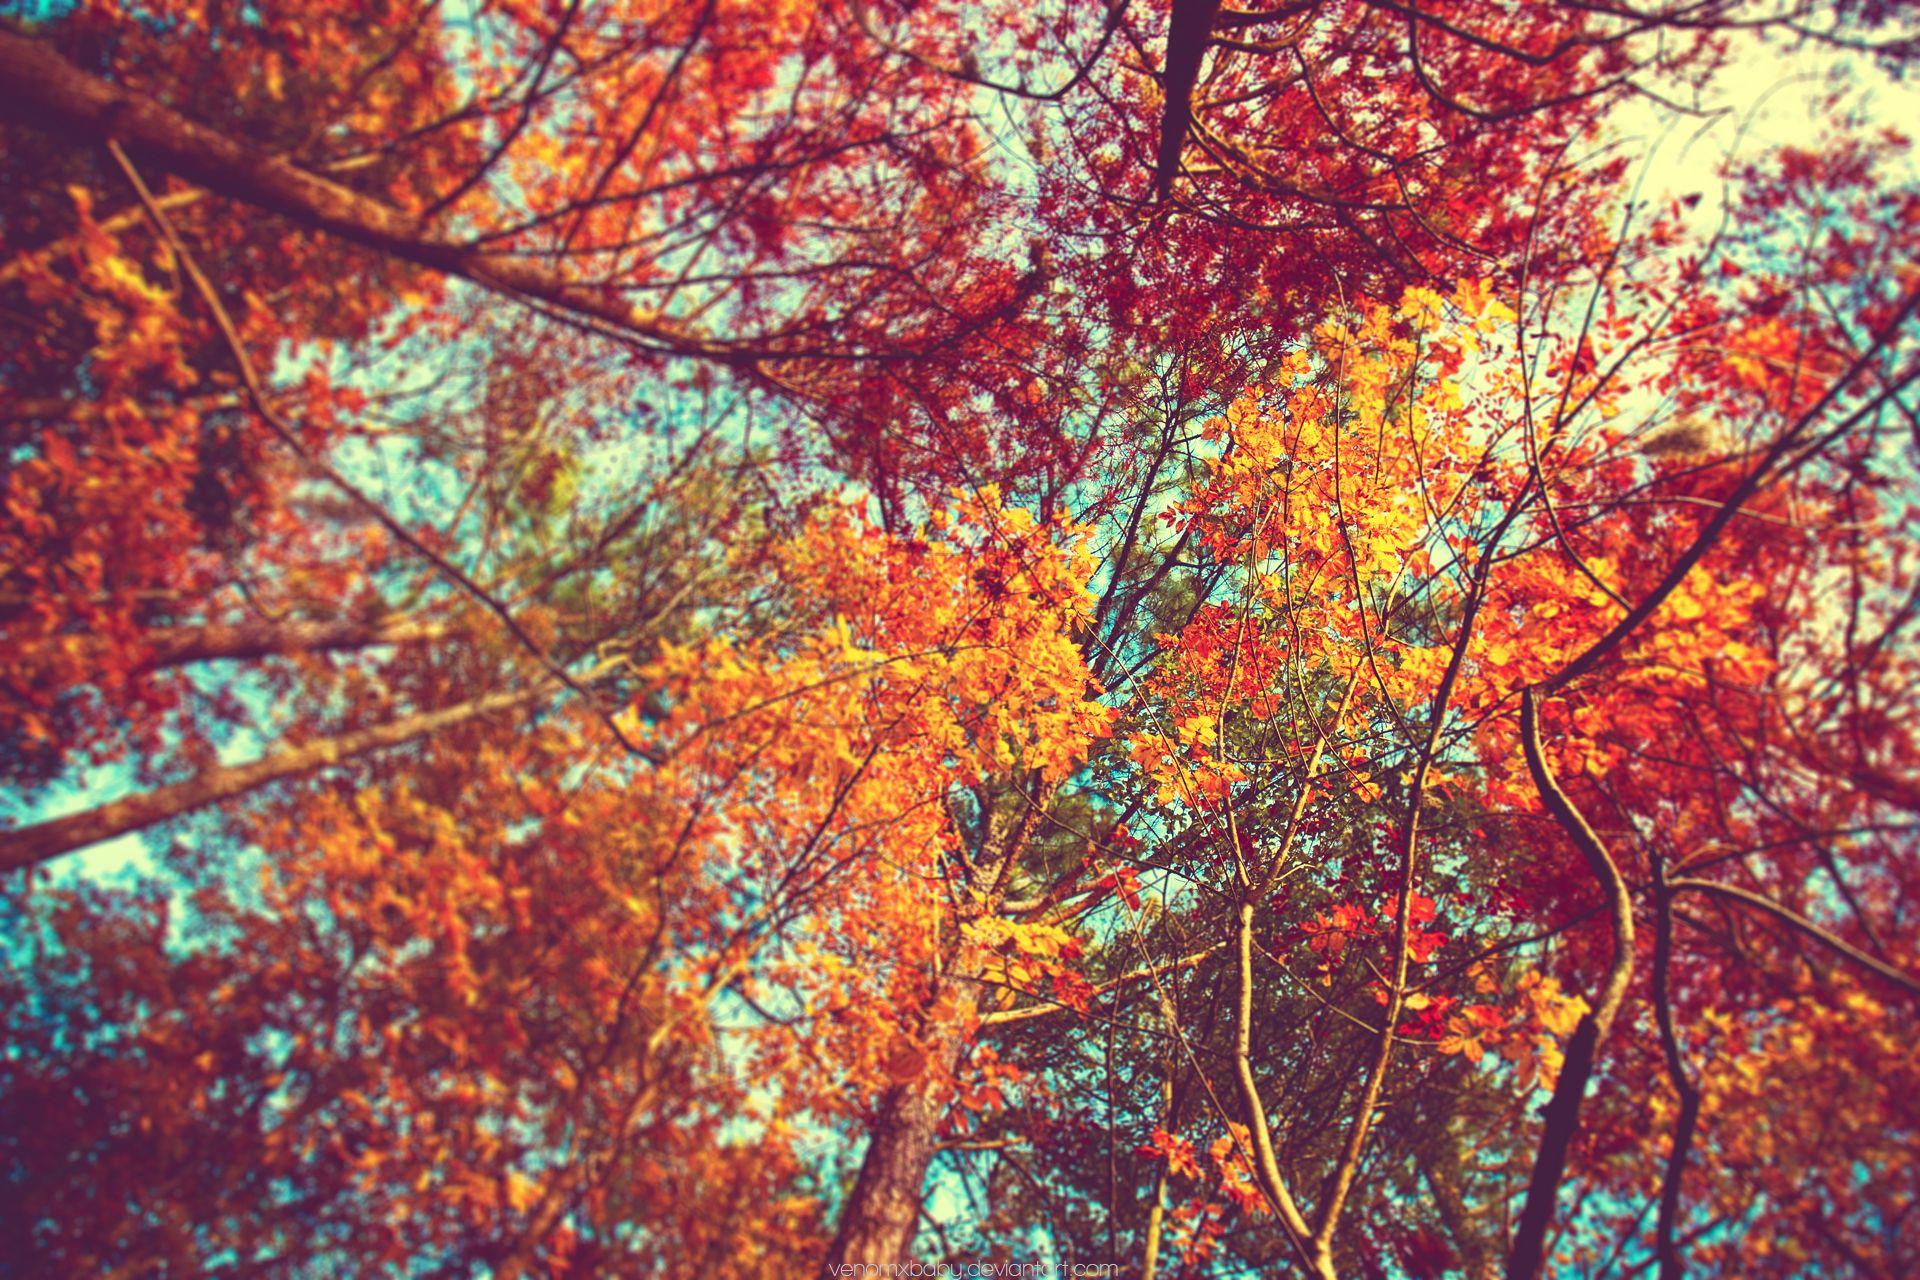 Autumn Tumblr Wallpaper 1080p with High Definition